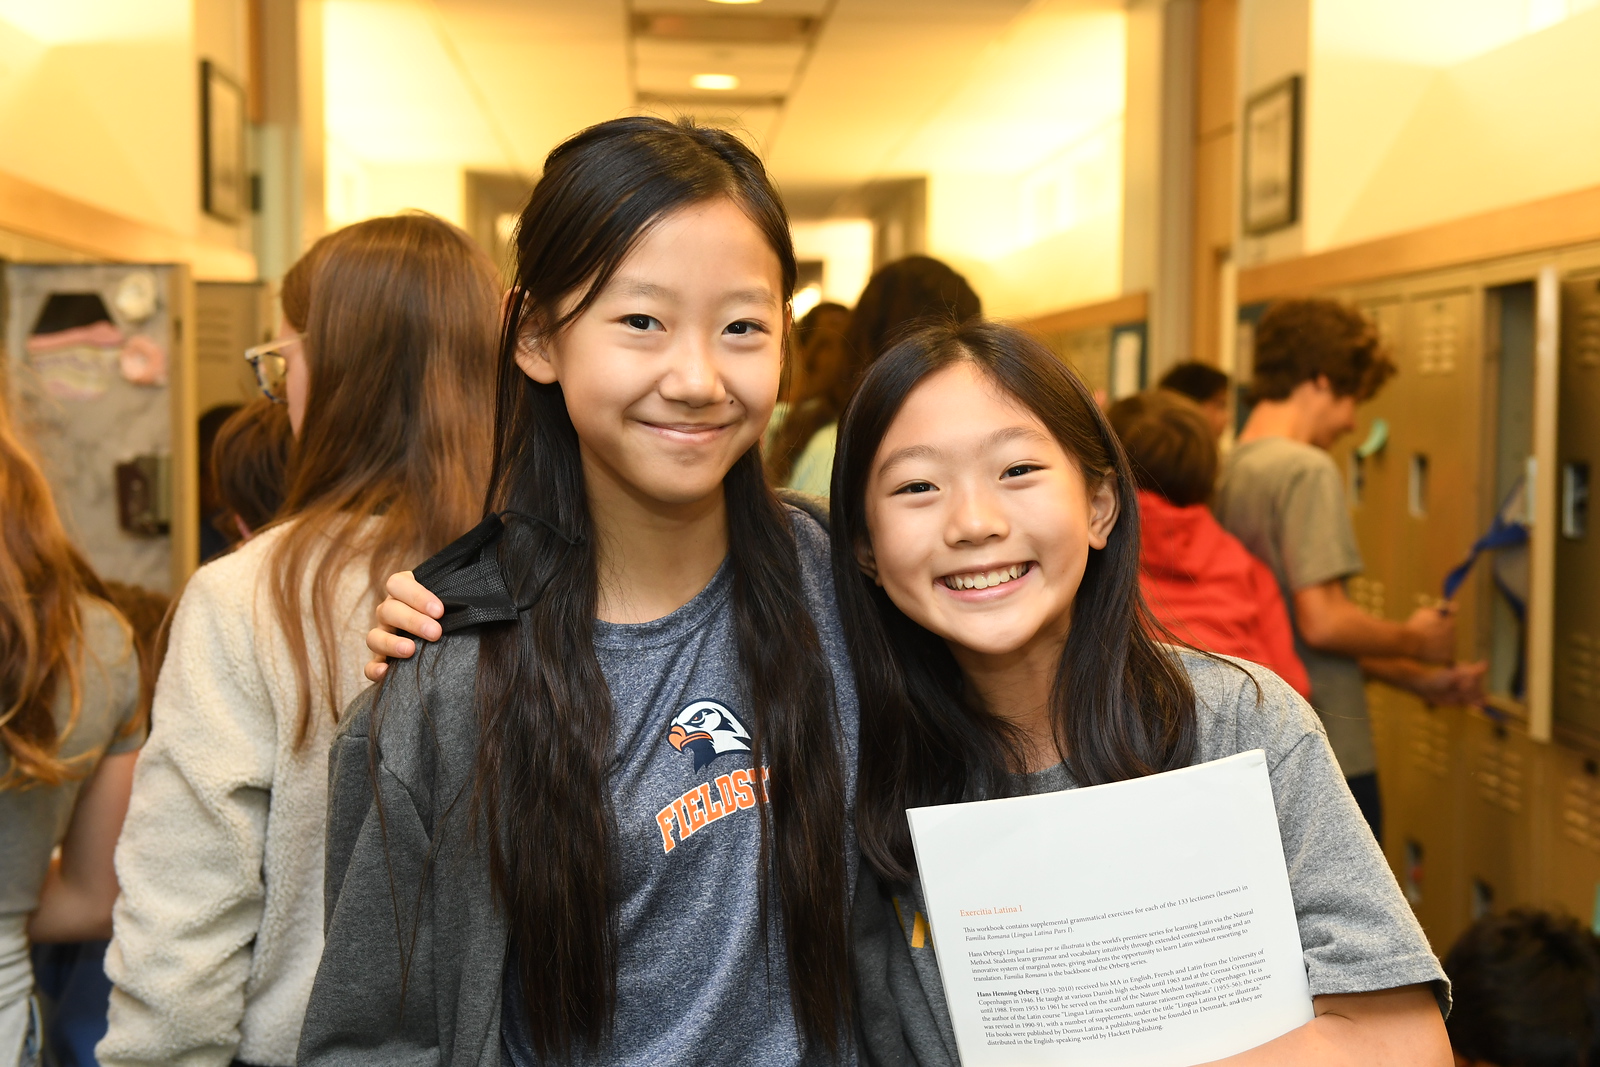 Fieldston Middle students smile and pose in school hallway with a copy of a paper related to their project. 